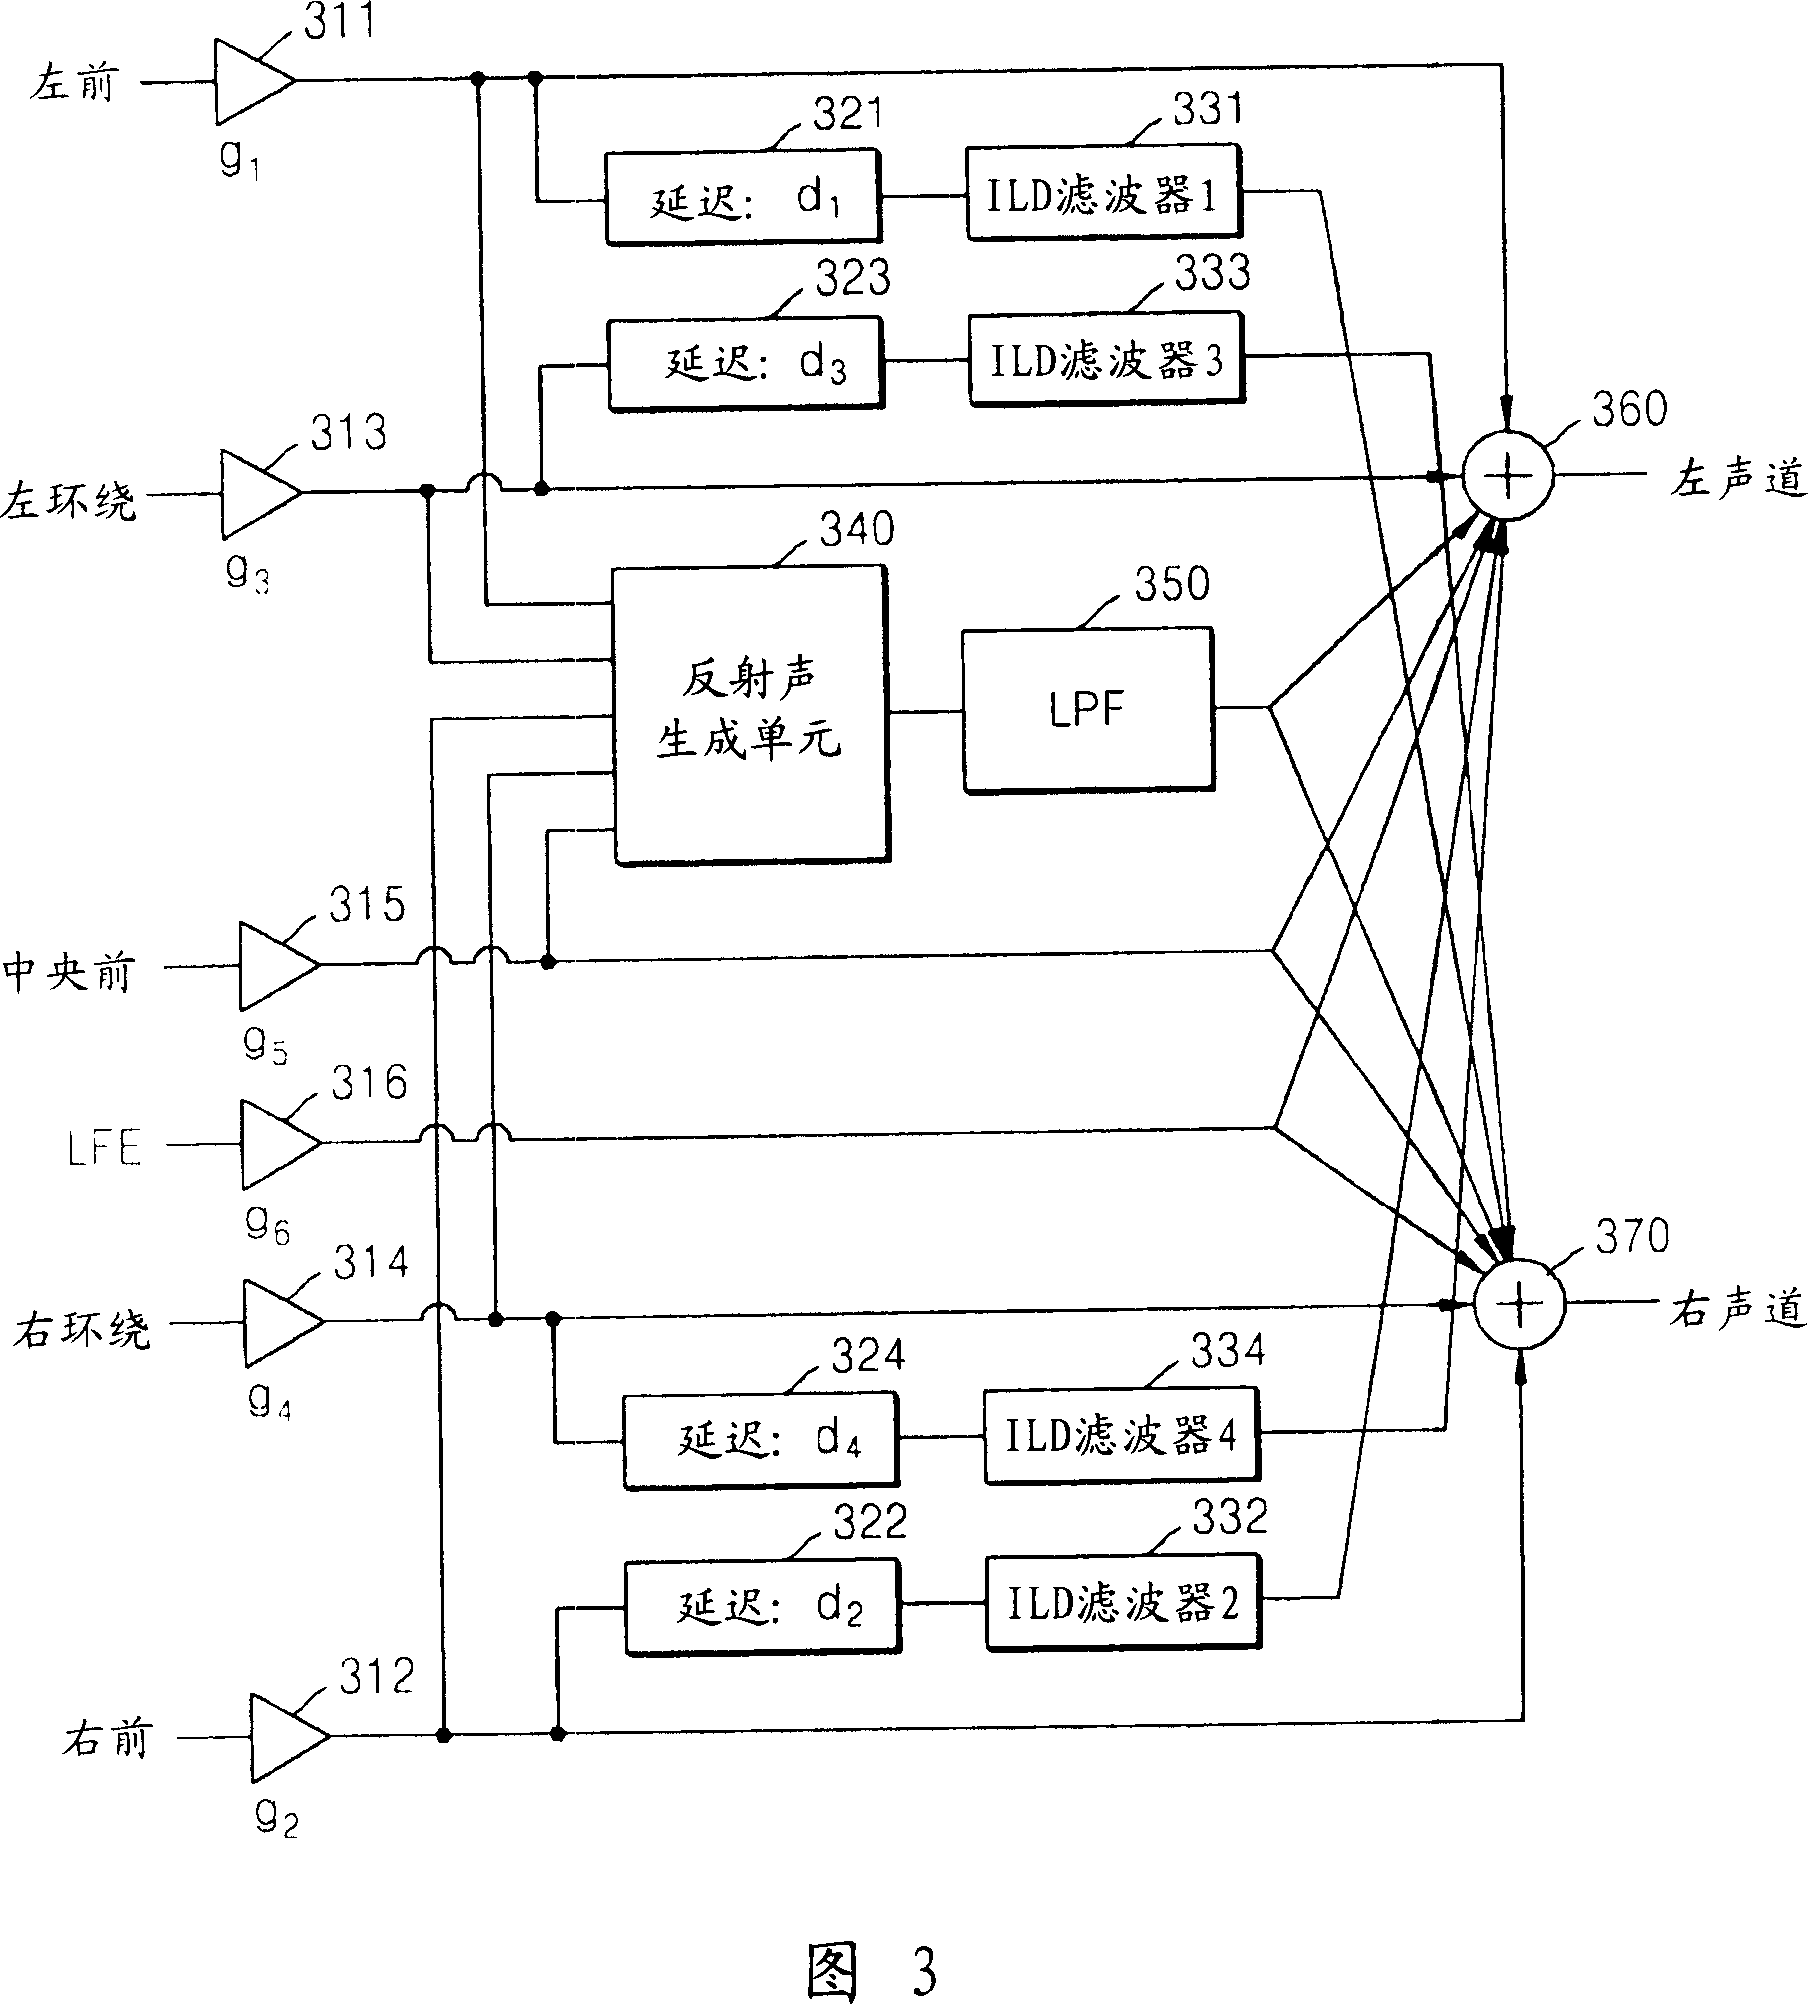 Method and apparatus to simulate 2-channel virtualized sound for multi-channel sound